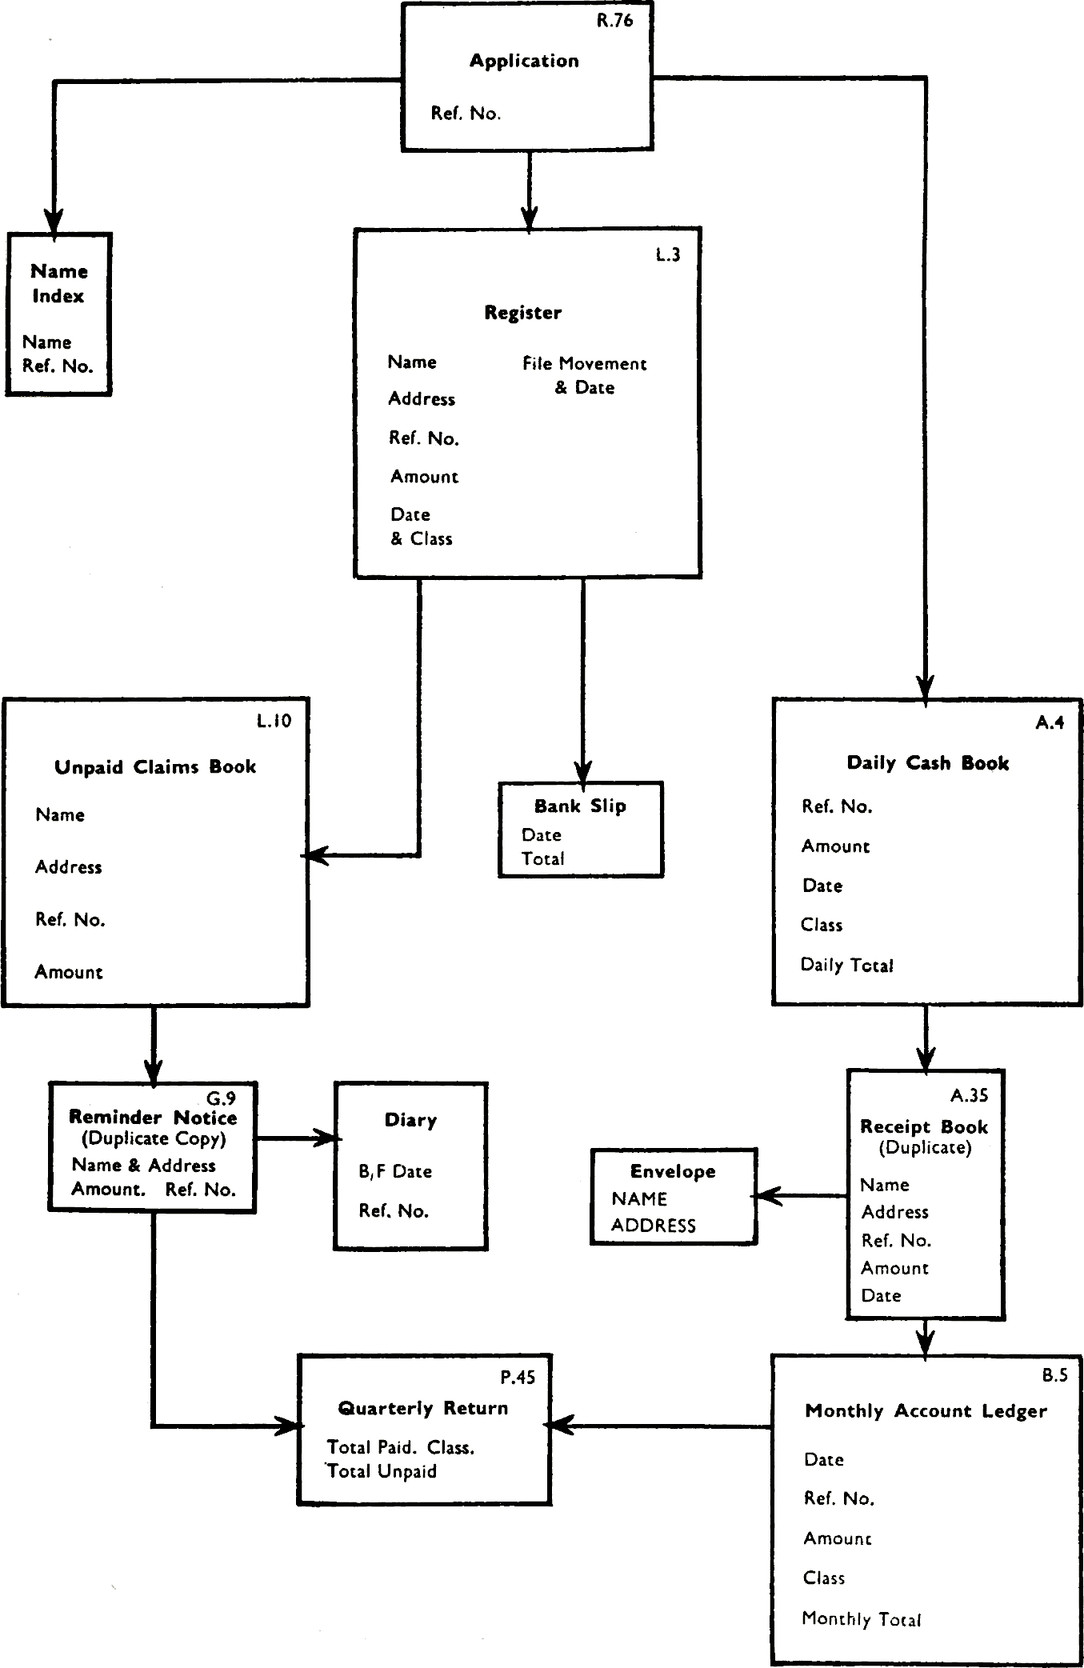 Flow chart based diagram.
Includes each form and what data is contains, with arrows for which form it feeds into.
Extract from chart:
“Application with Ref No. feeds in Register with Name, Address, Ref. No., Ammount, Date & Class. File Movement & date.”